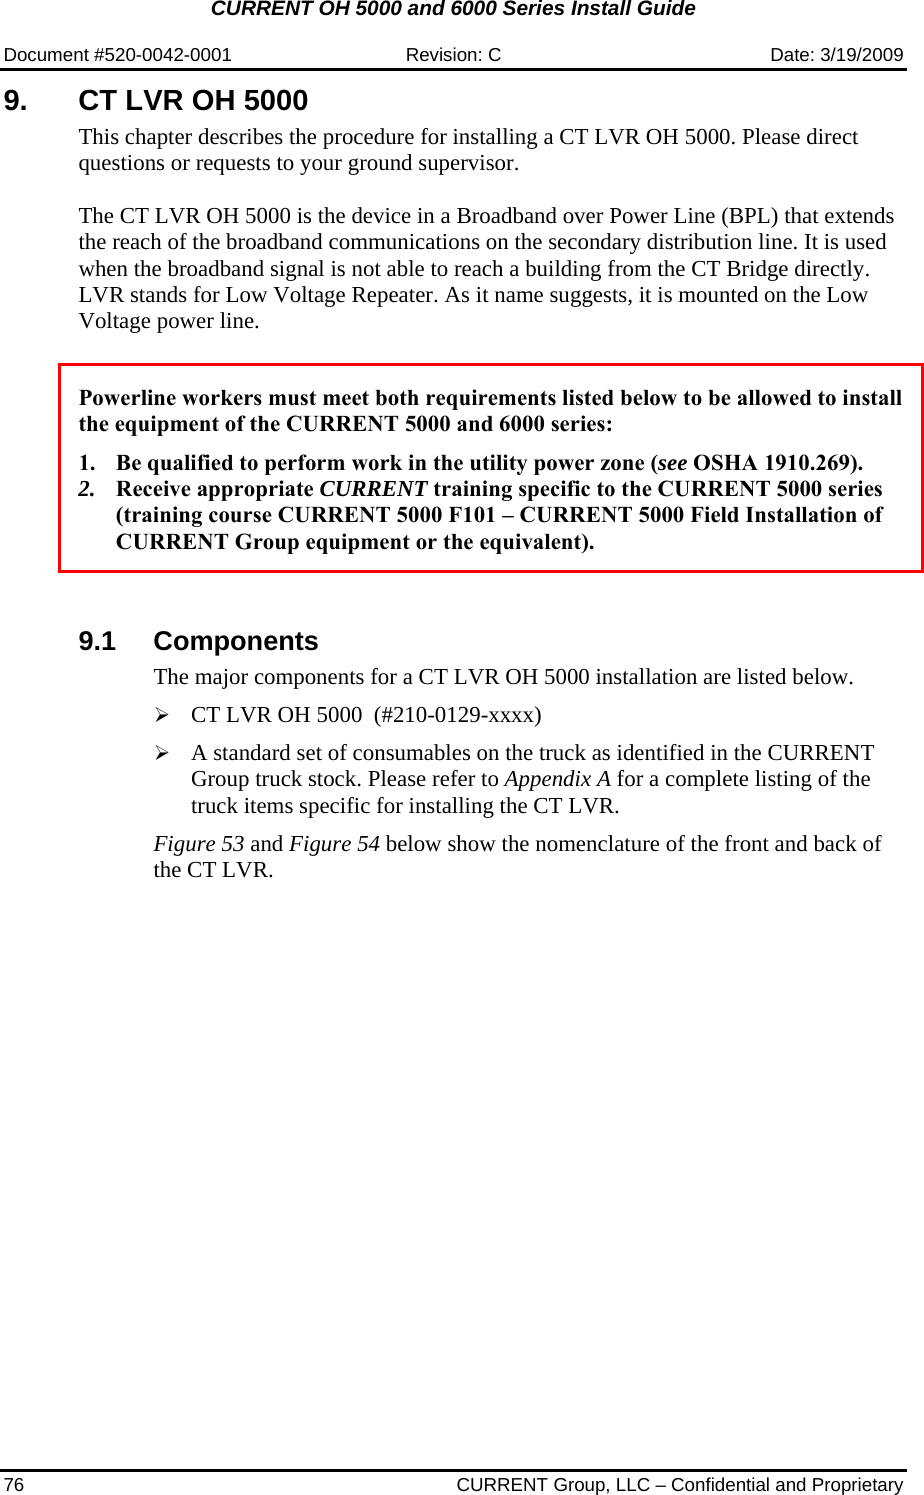 CURRENT OH 5000 and 6000 Series Install Guide  Document #520-0042-0001  Revision: C  Date: 3/19/2009 76  CURRENT Group, LLC – Confidential and Proprietary 9.  CT LVR OH 5000  This chapter describes the procedure for installing a CT LVR OH 5000. Please direct questions or requests to your ground supervisor.  The CT LVR OH 5000 is the device in a Broadband over Power Line (BPL) that extends the reach of the broadband communications on the secondary distribution line. It is used when the broadband signal is not able to reach a building from the CT Bridge directly. LVR stands for Low Voltage Repeater. As it name suggests, it is mounted on the Low Voltage power line.    Powerline workers must meet both requirements listed below to be allowed to install the equipment of the CURRENT 5000 and 6000 series:  1. Be qualified to perform work in the utility power zone (see OSHA 1910.269). 2. Receive appropriate CURRENT training specific to the CURRENT 5000 series (training course CURRENT 5000 F101 – CURRENT 5000 Field Installation of CURRENT Group equipment or the equivalent).    9.1 Components The major components for a CT LVR OH 5000 installation are listed below.  ¾ CT LVR OH 5000  (#210-0129-xxxx)  ¾ A standard set of consumables on the truck as identified in the CURRENT Group truck stock. Please refer to Appendix A for a complete listing of the truck items specific for installing the CT LVR.   Figure 53 and Figure 54 below show the nomenclature of the front and back of the CT LVR.    